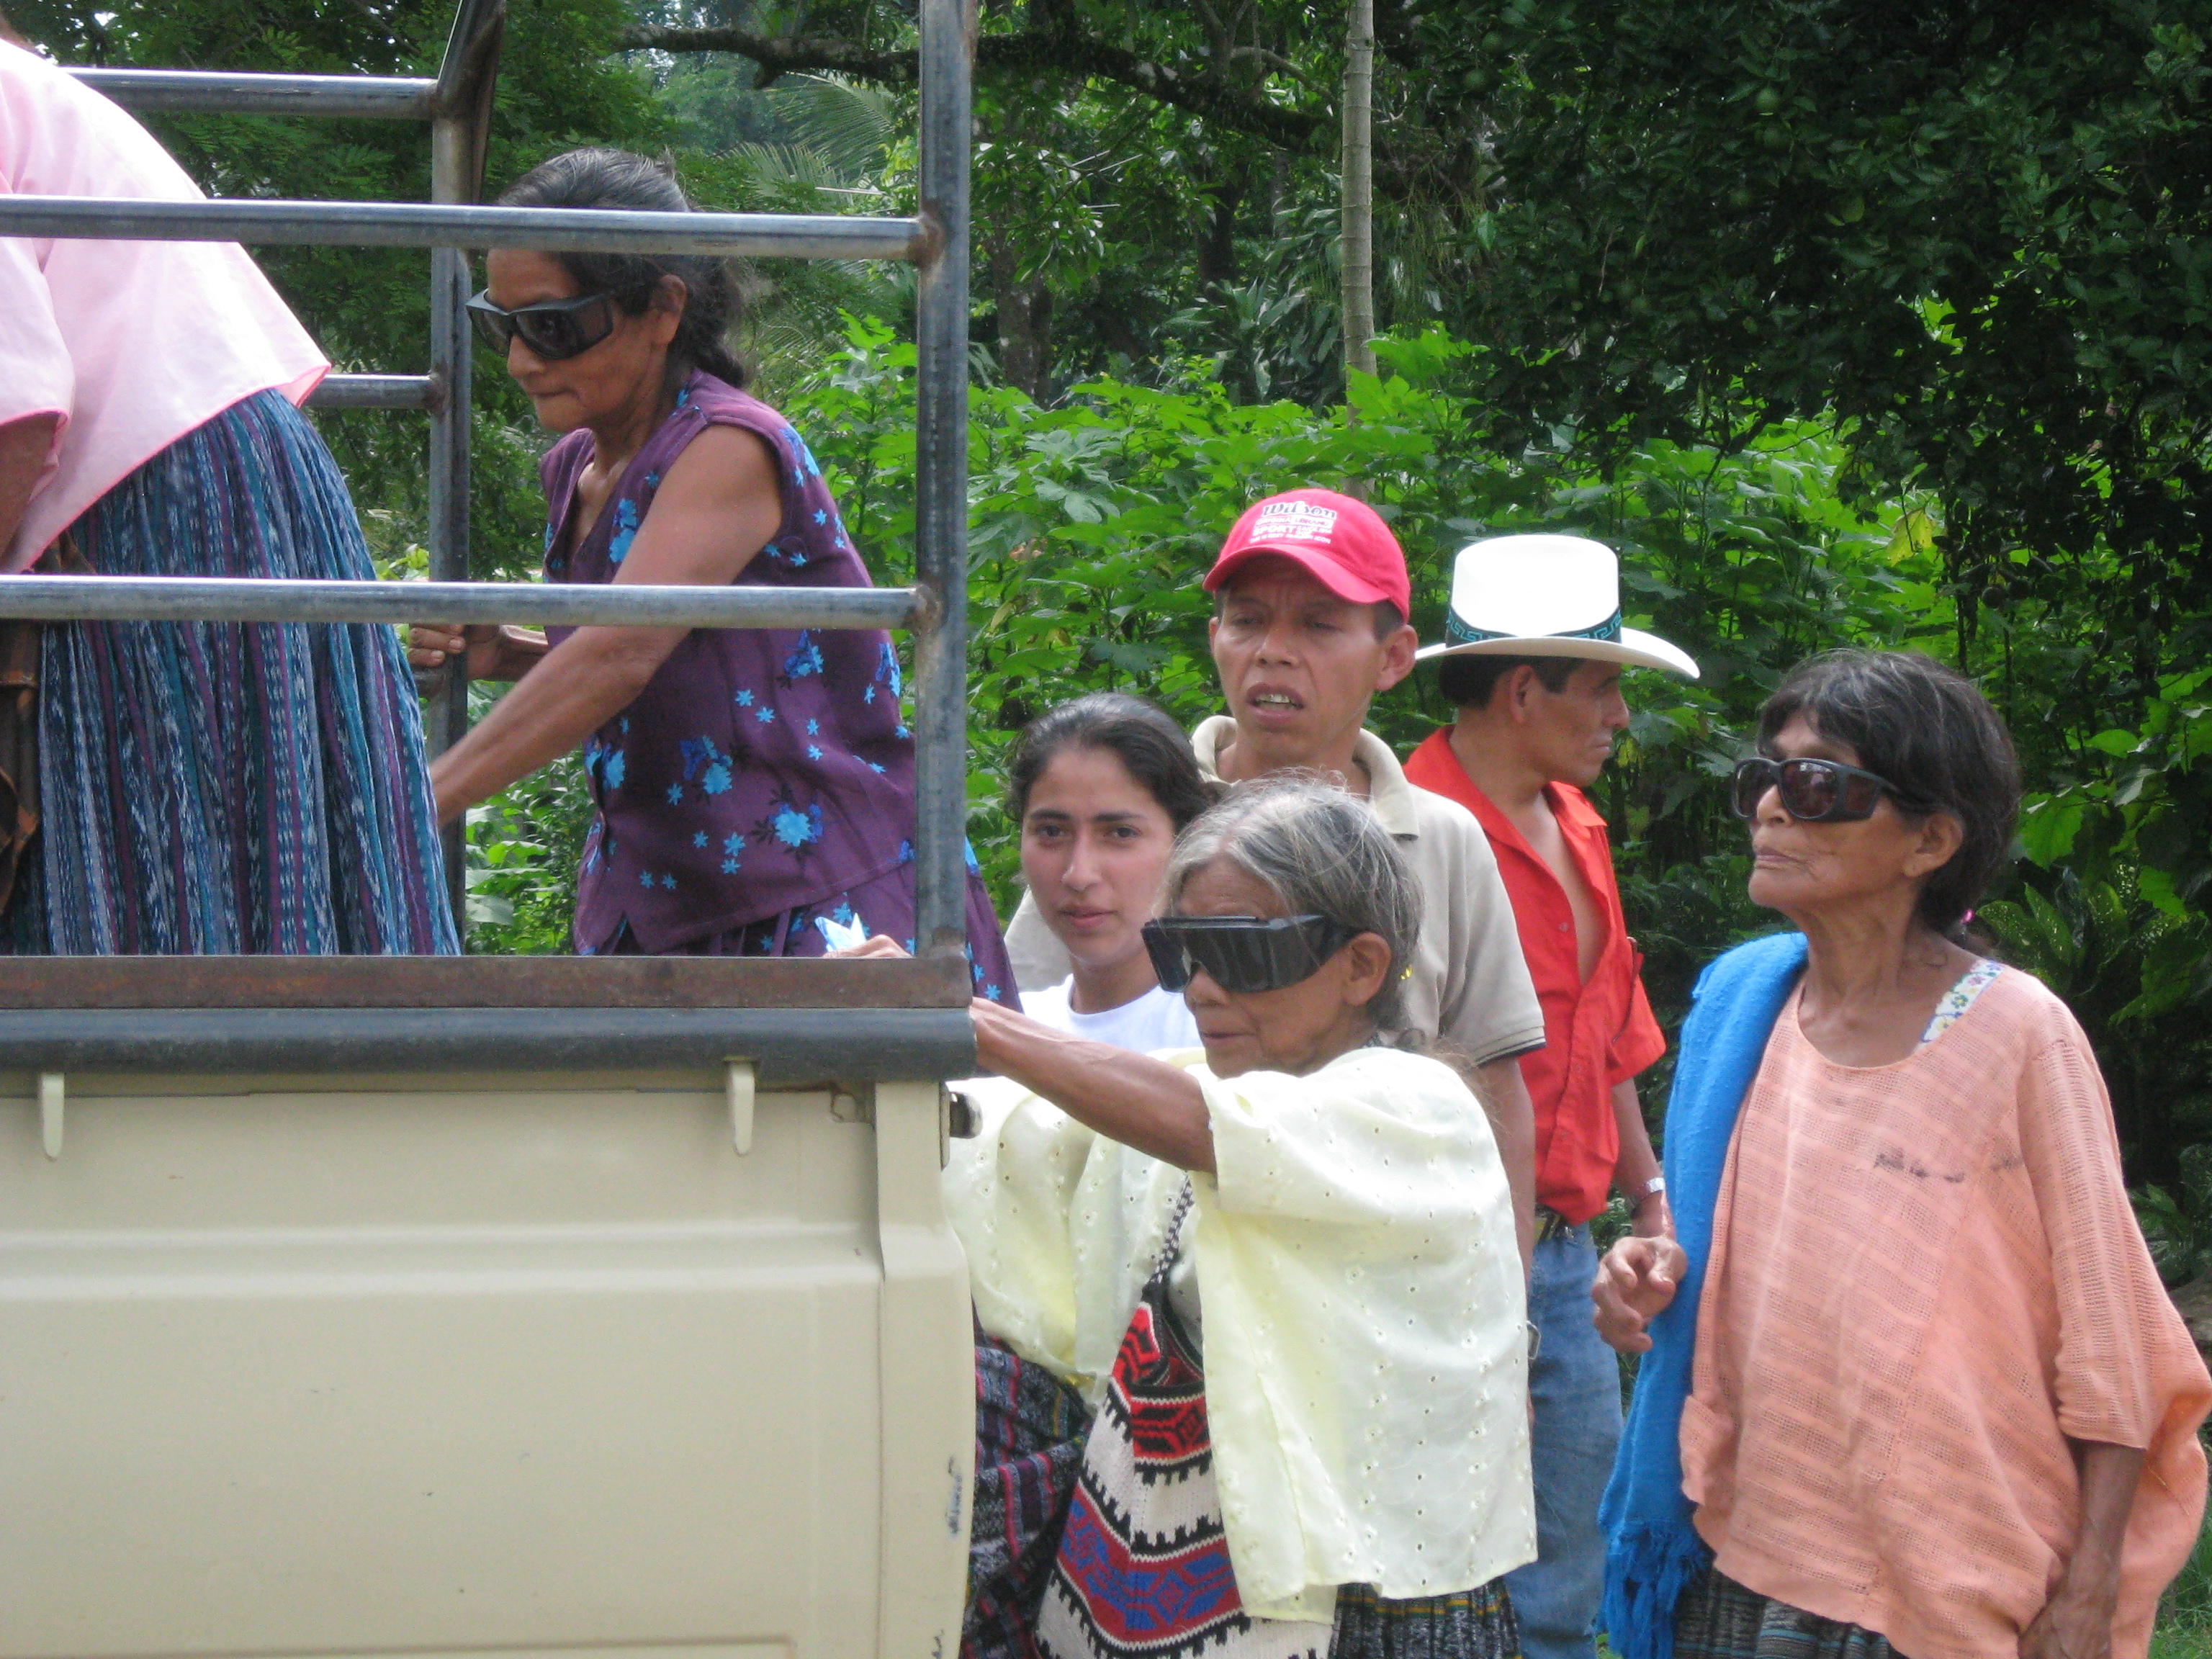 Cataract patients at the Seva eye camp in Guatemala being given free transportation to the hospital for surgery. Photo by Laura Spencer